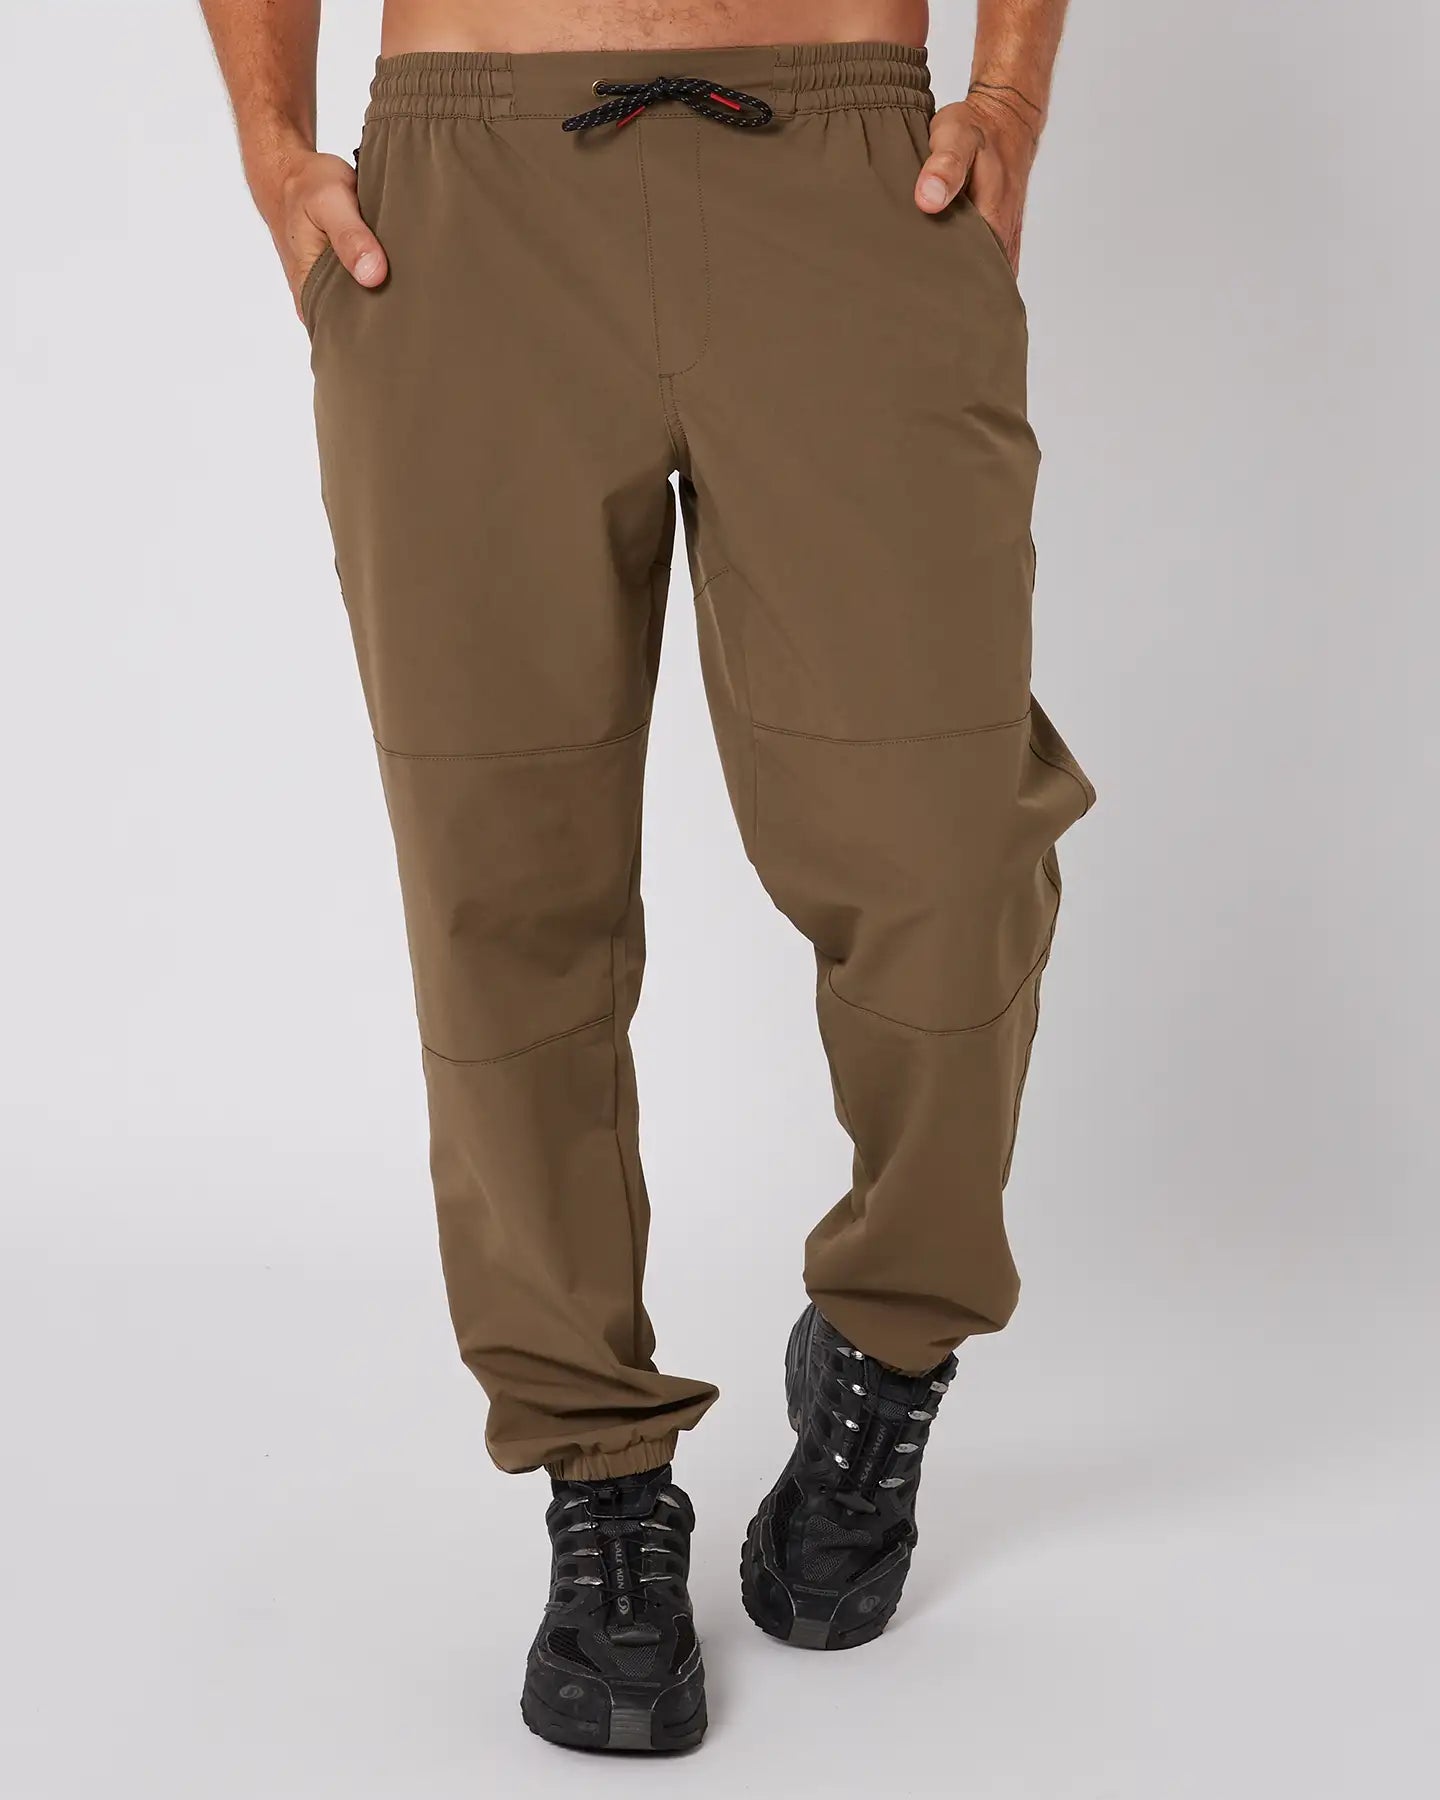 Follow All Day Pants - Deep Taupe